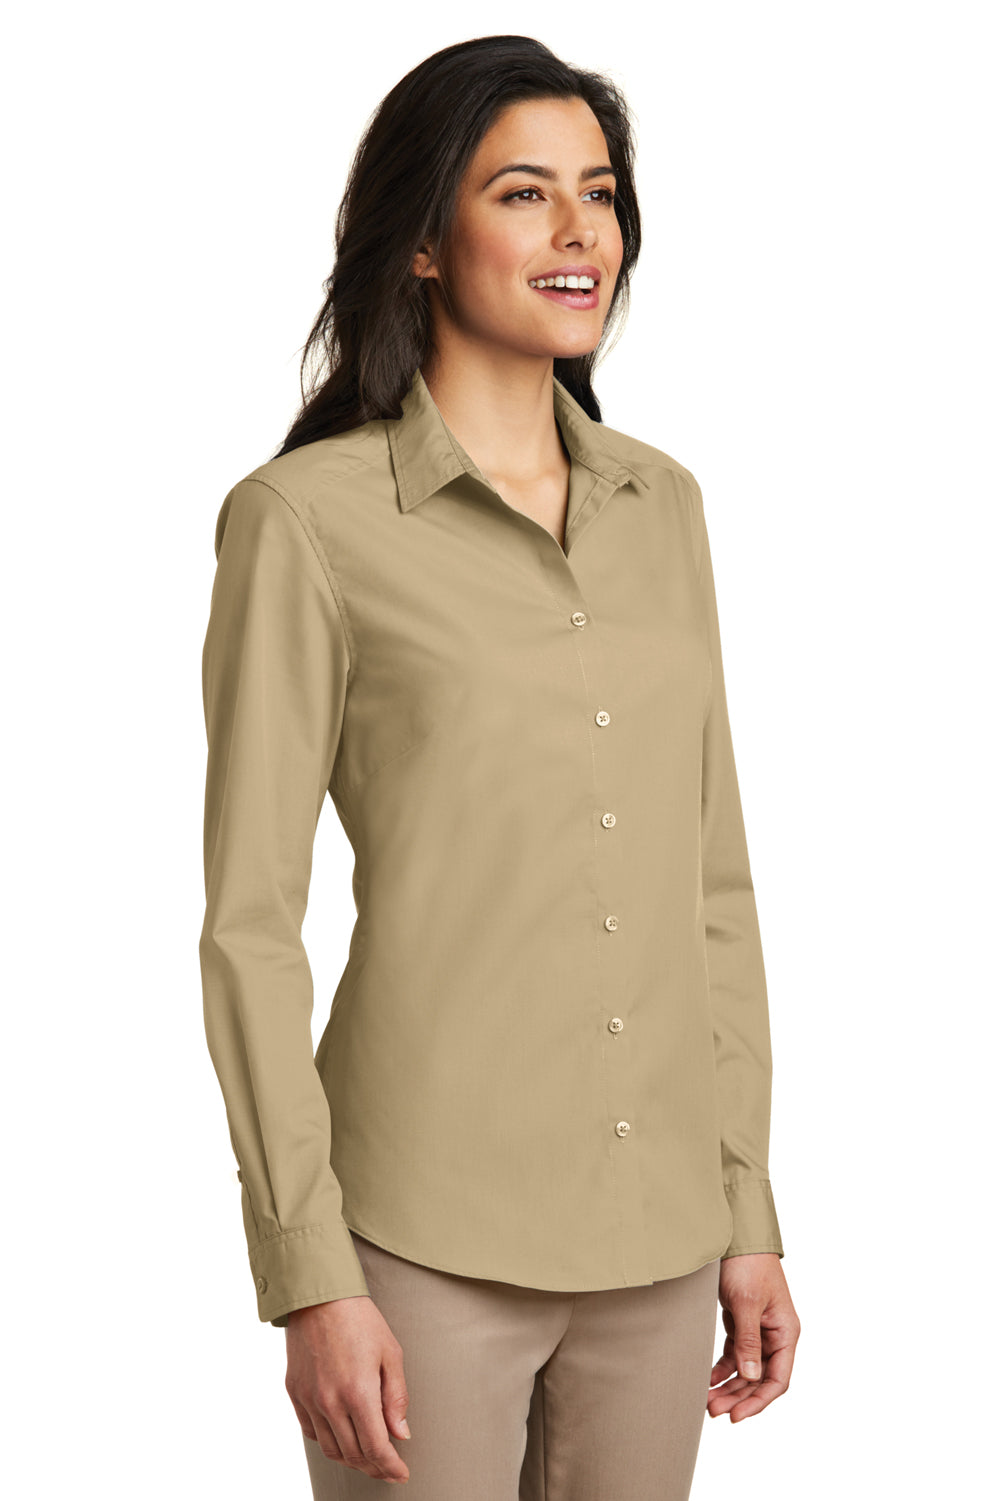 Port Authority LW100 Womens Carefree Stain Resistant Long Sleeve Button Down Shirt Wheat 3Q